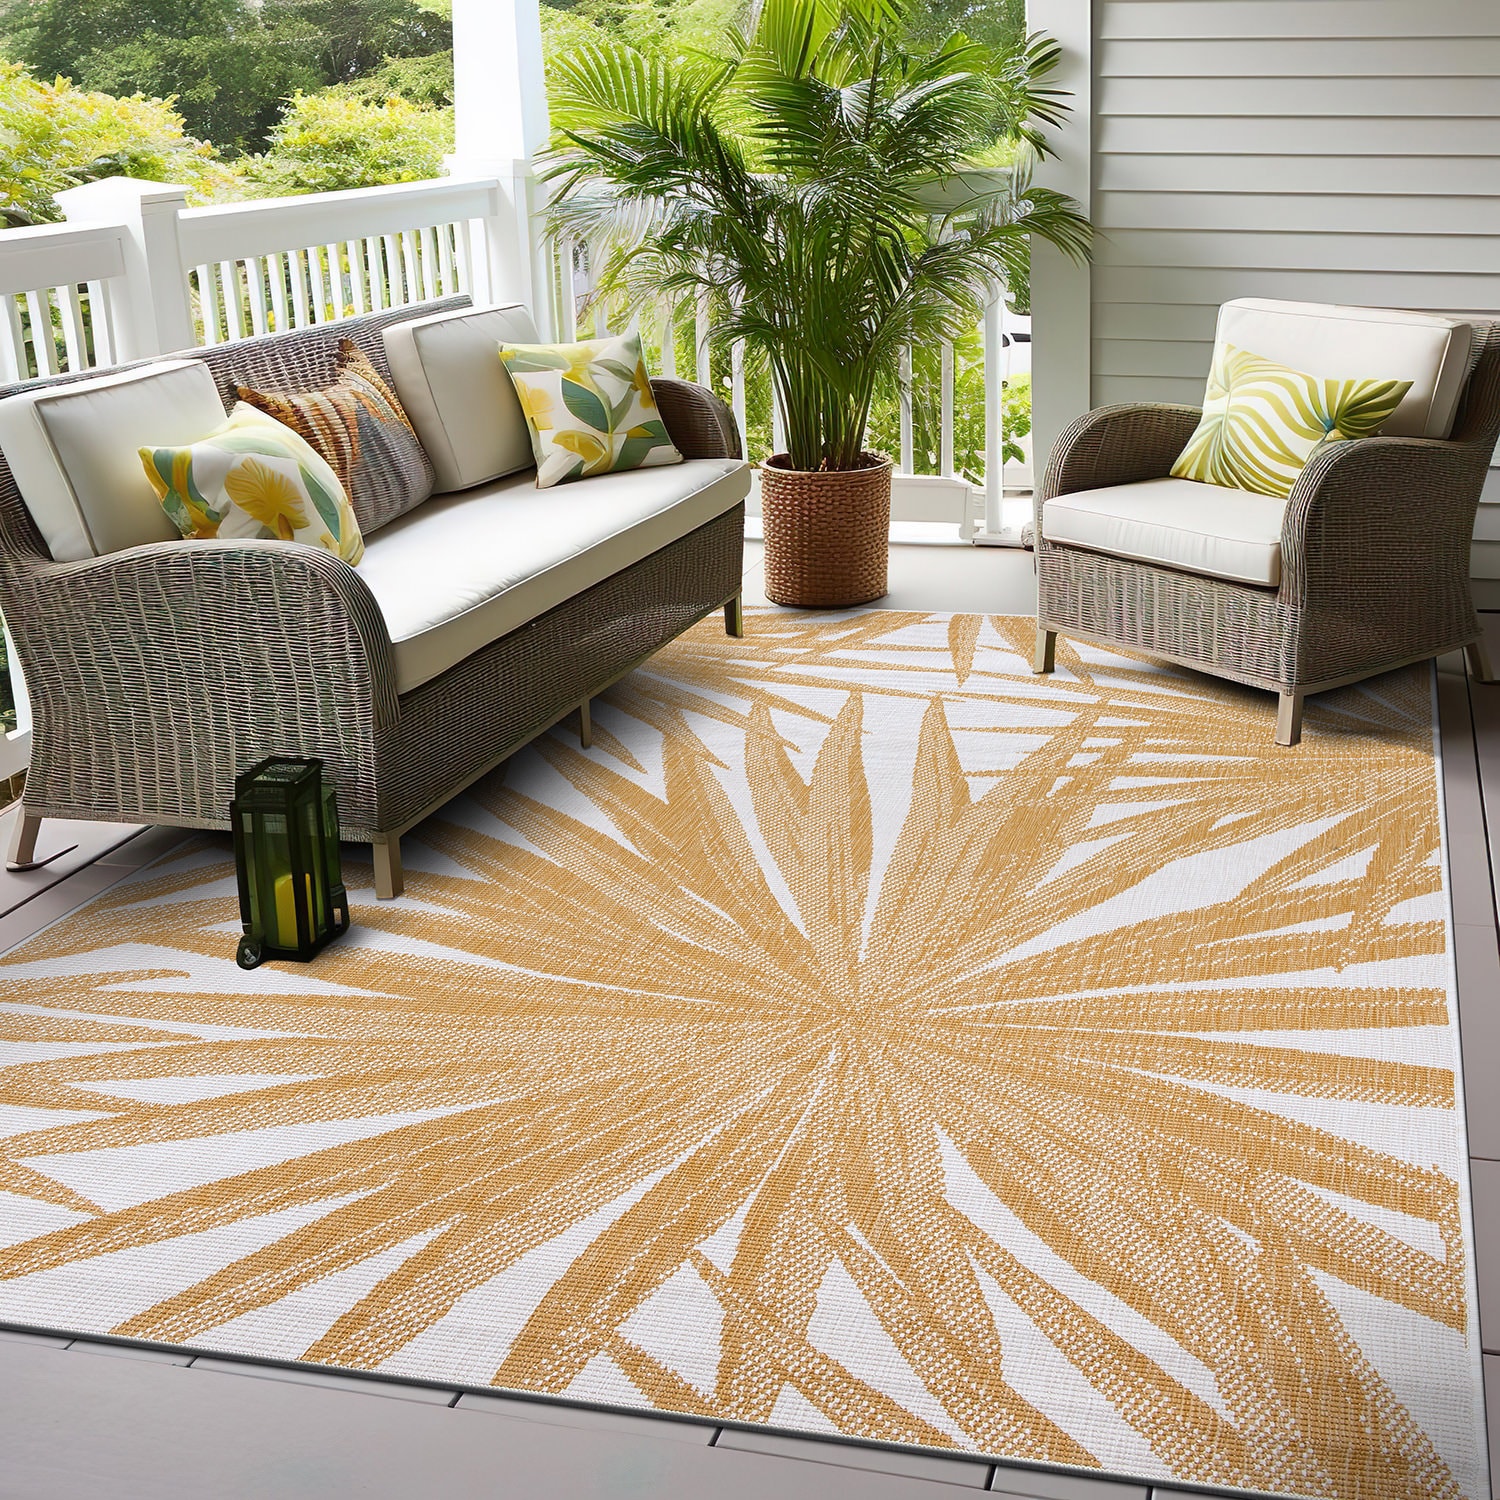 World Rug Gallery Contemporary Tropical Leaves Indoor/Outdoor Waterproof Patio Area Rug, Yellow, 2x7 ft